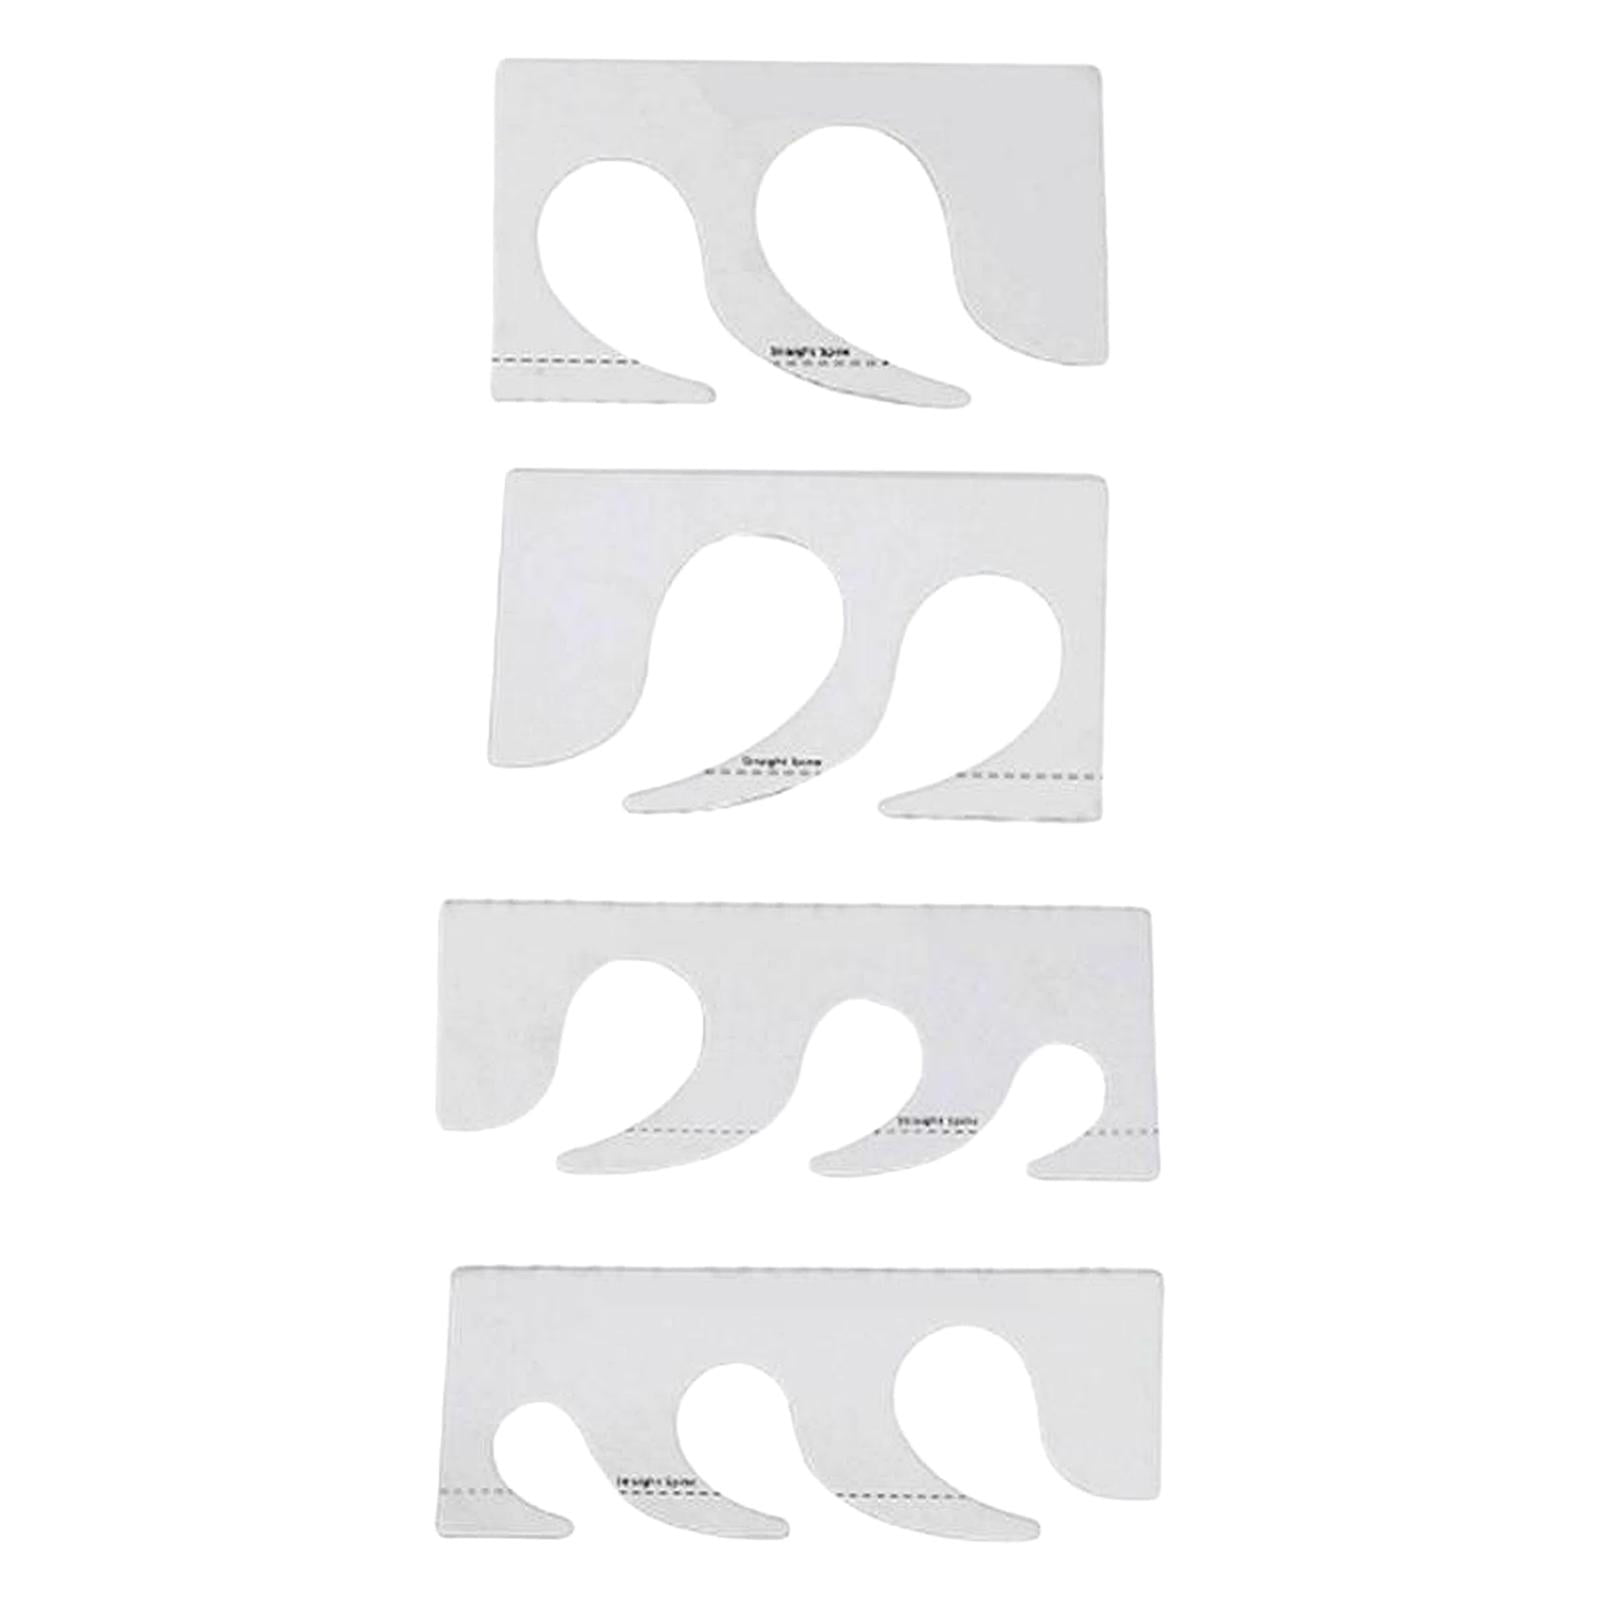 Clearance! YOHOME Periwinkles Plates Quilting Templates Quilting